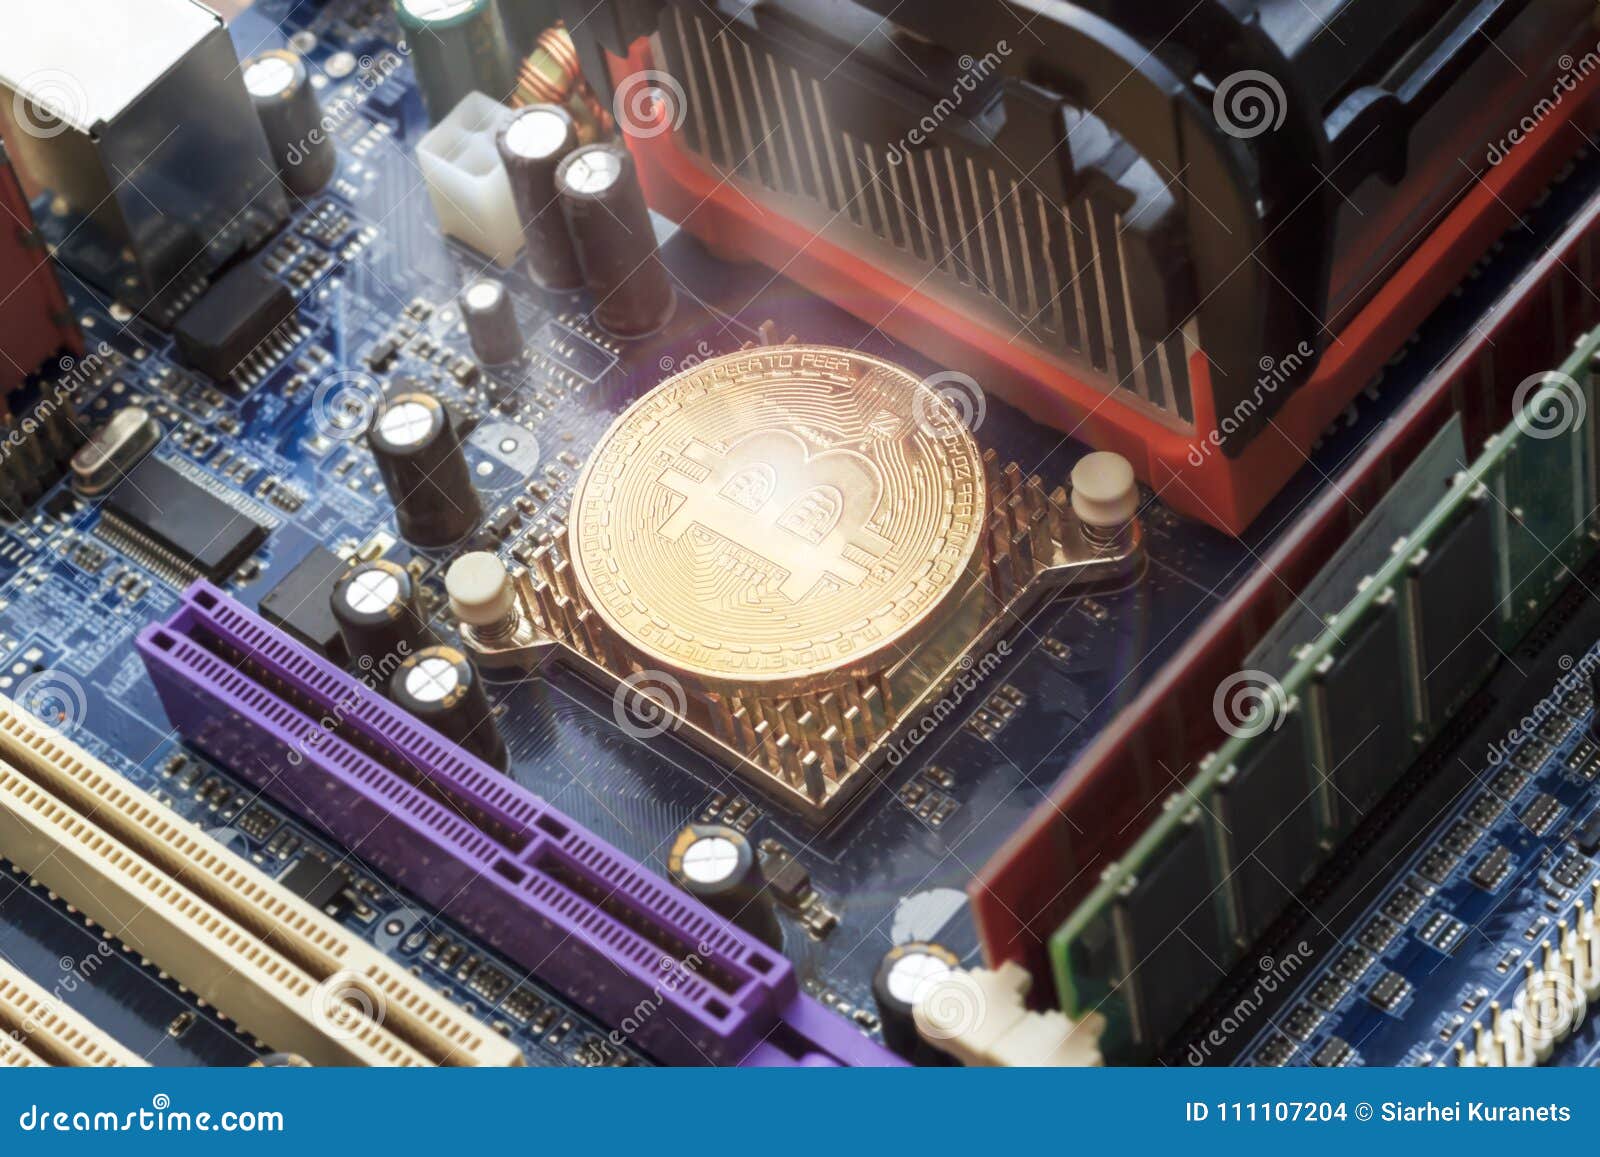 Buy computer parts with crypto does it matter which country i register crypto exchange